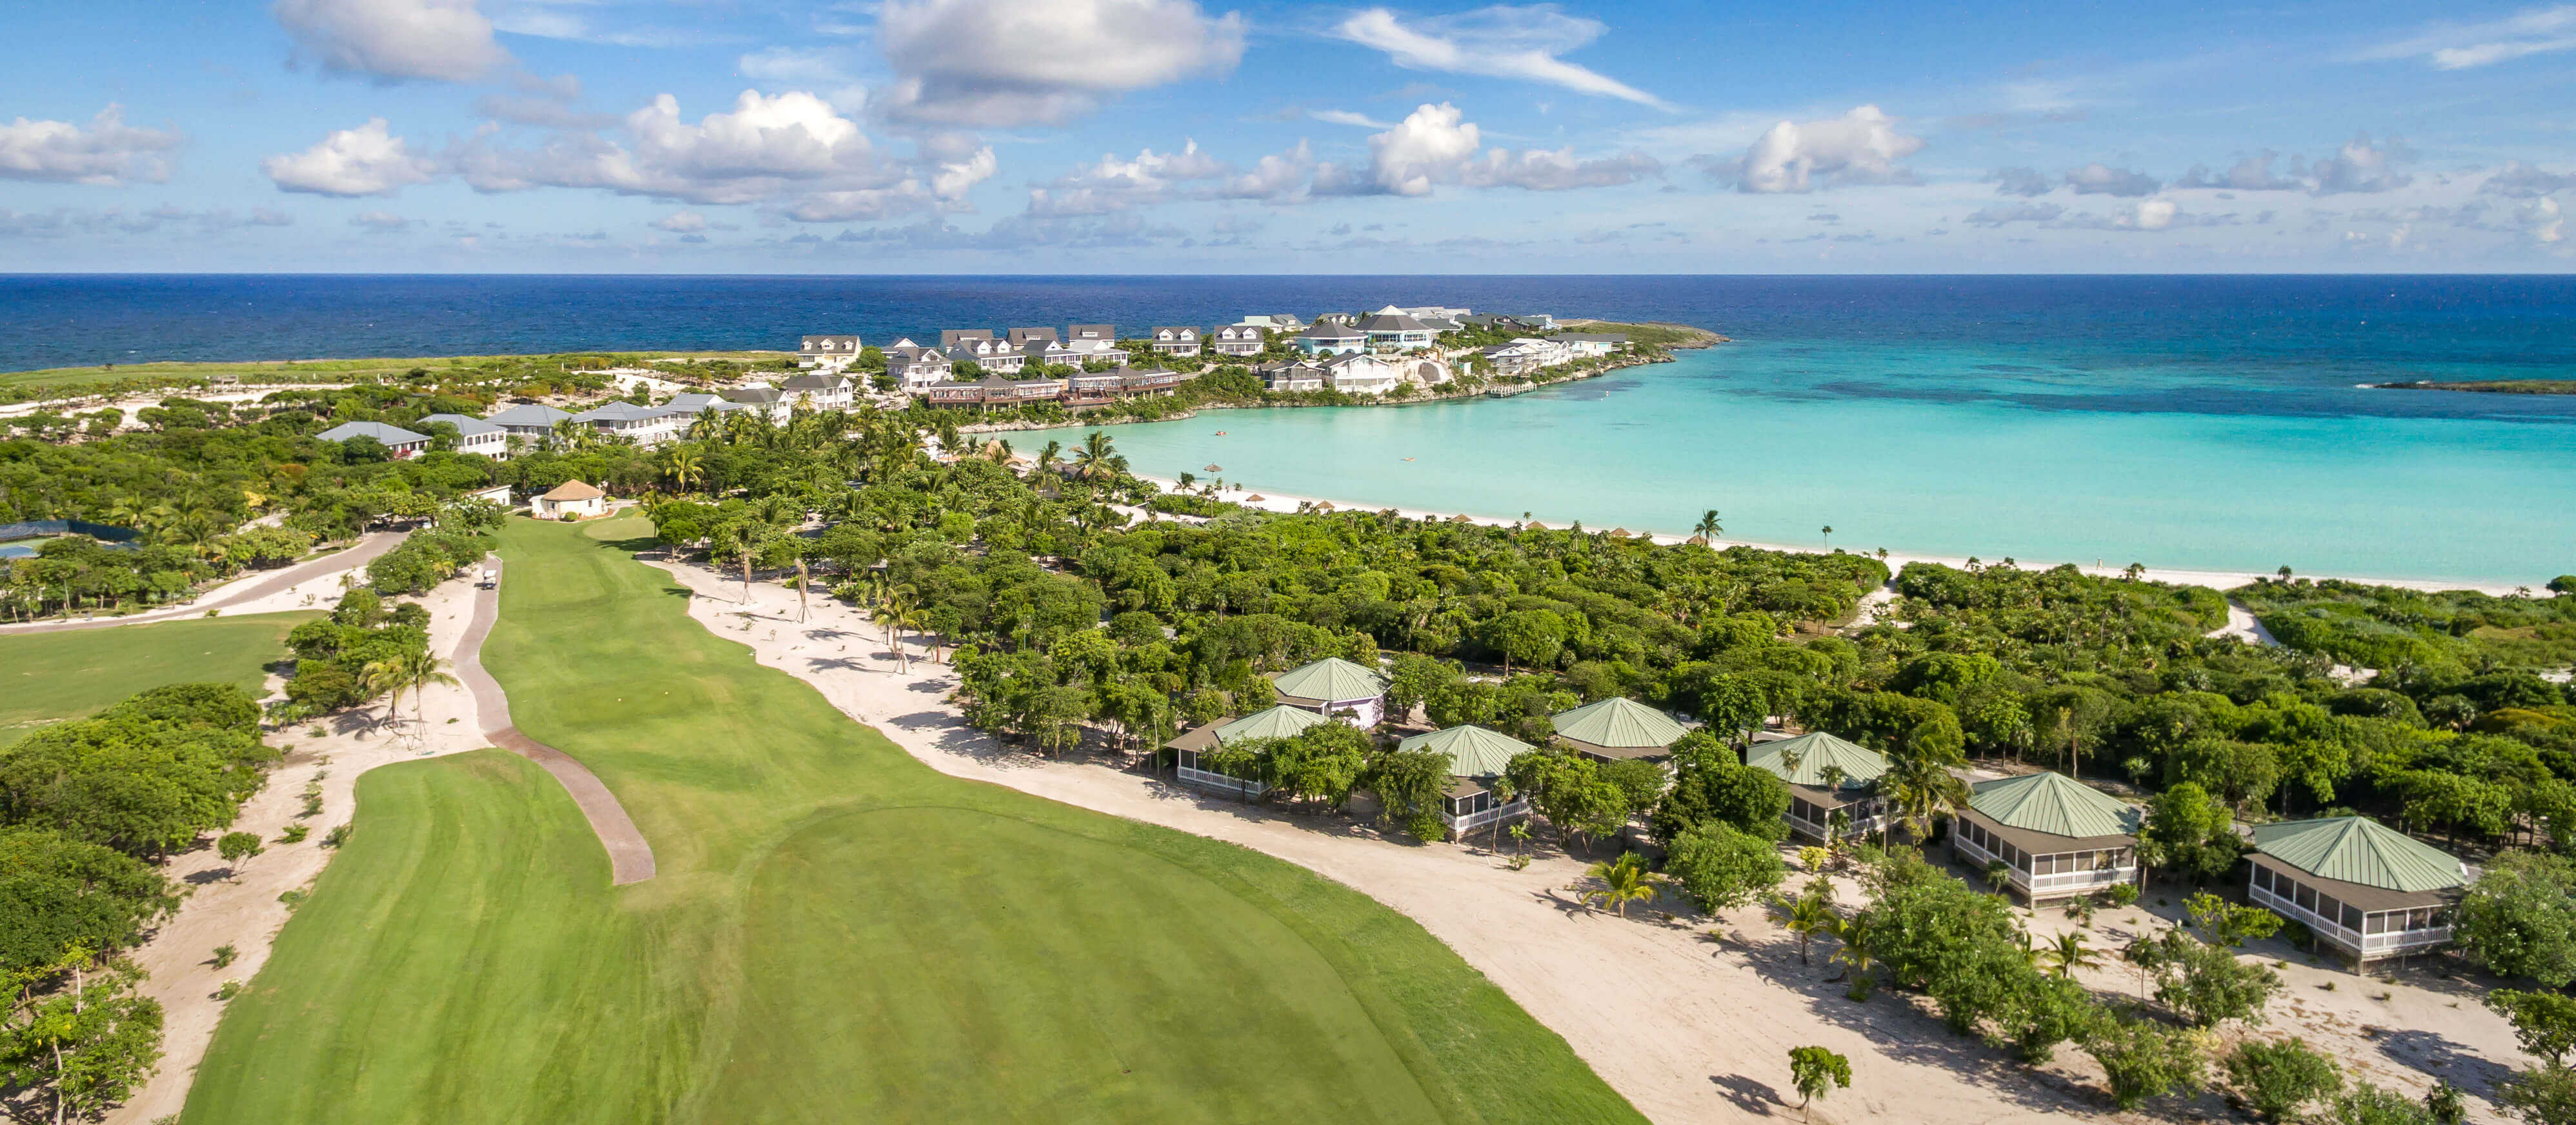 Passage to Paradise: Win a Stay at The Abaco Club -